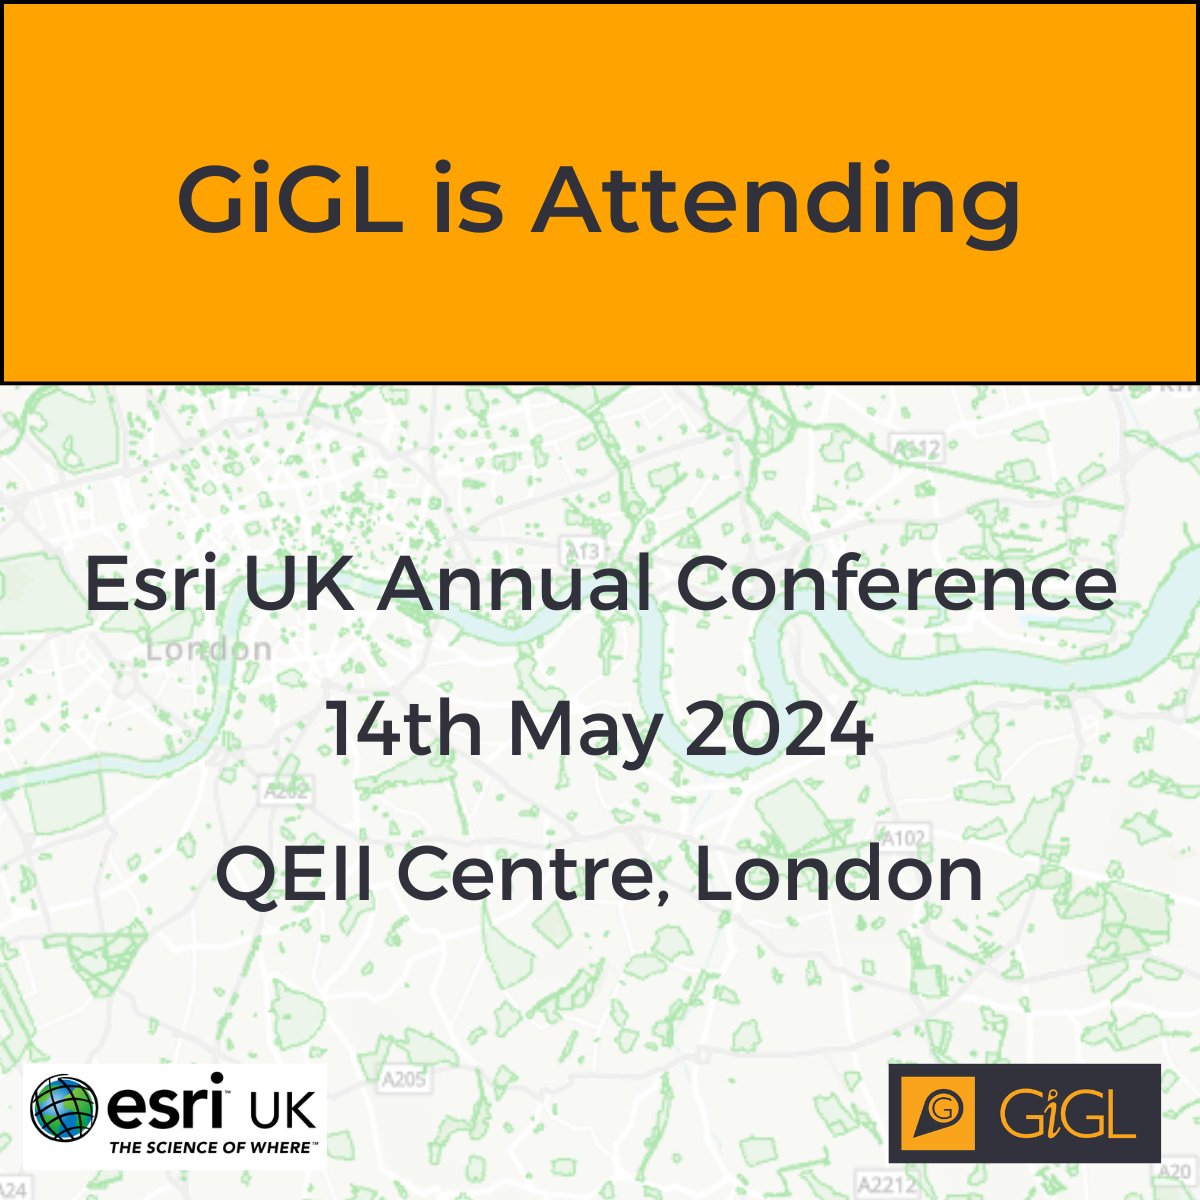 GiGL staff will be attending the @esriuk Annual Conference next Tuesday! We are excited to attend some innovative GIS talks and connect with our fellow LERC colleagues. If you are also attending, let us know! #EsriUKAC #Esri #GIS